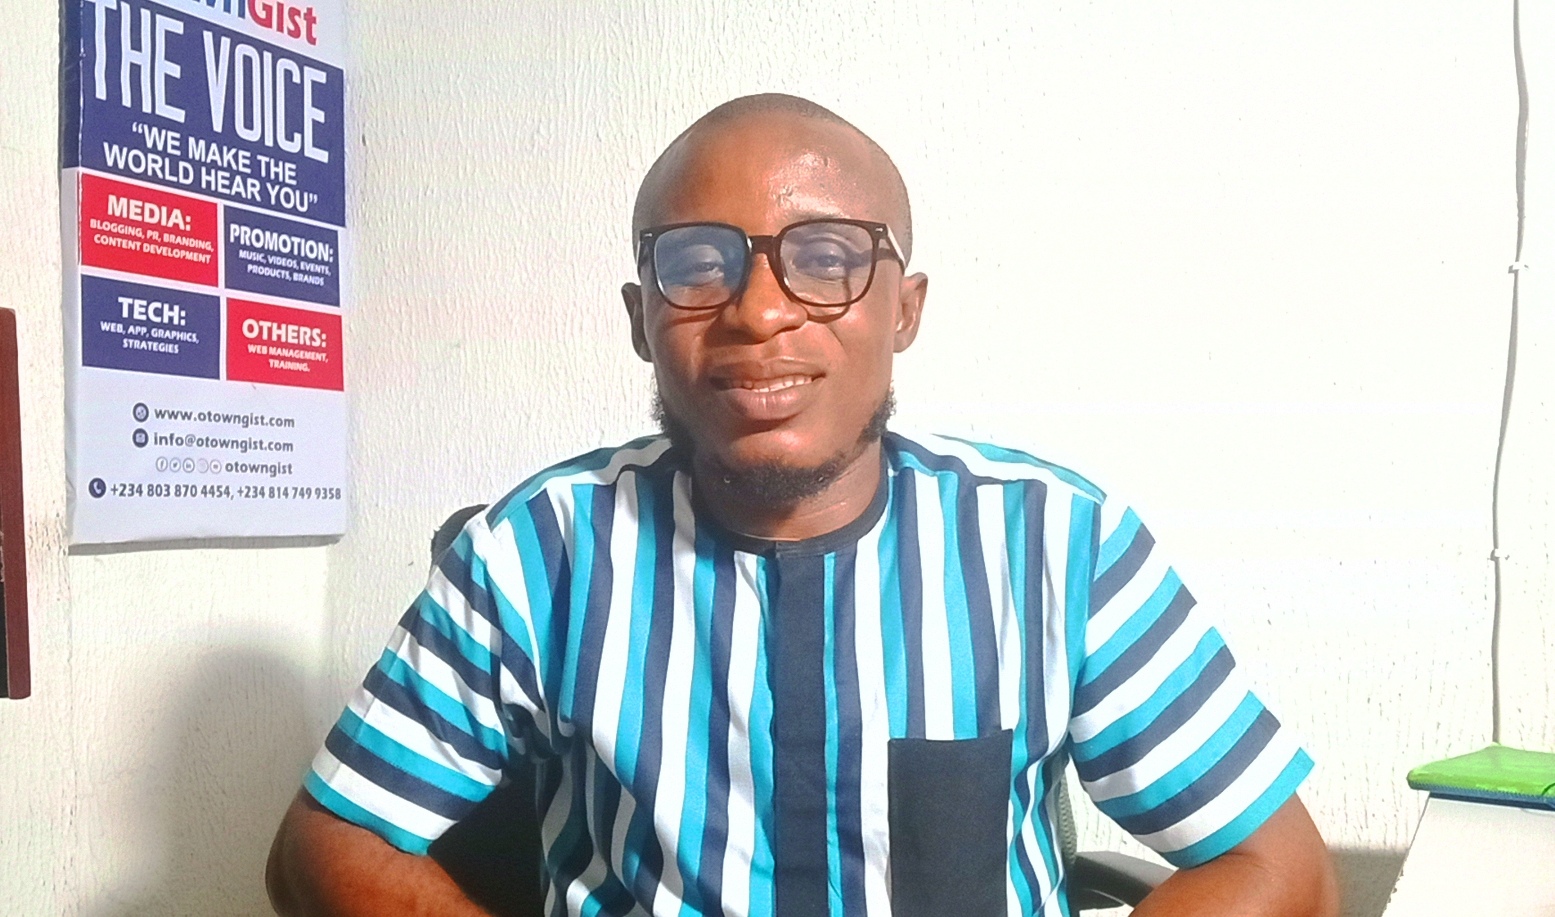 Universities should partner with media outfits to give students practical experience - Chinedu Hardy Nwadike 